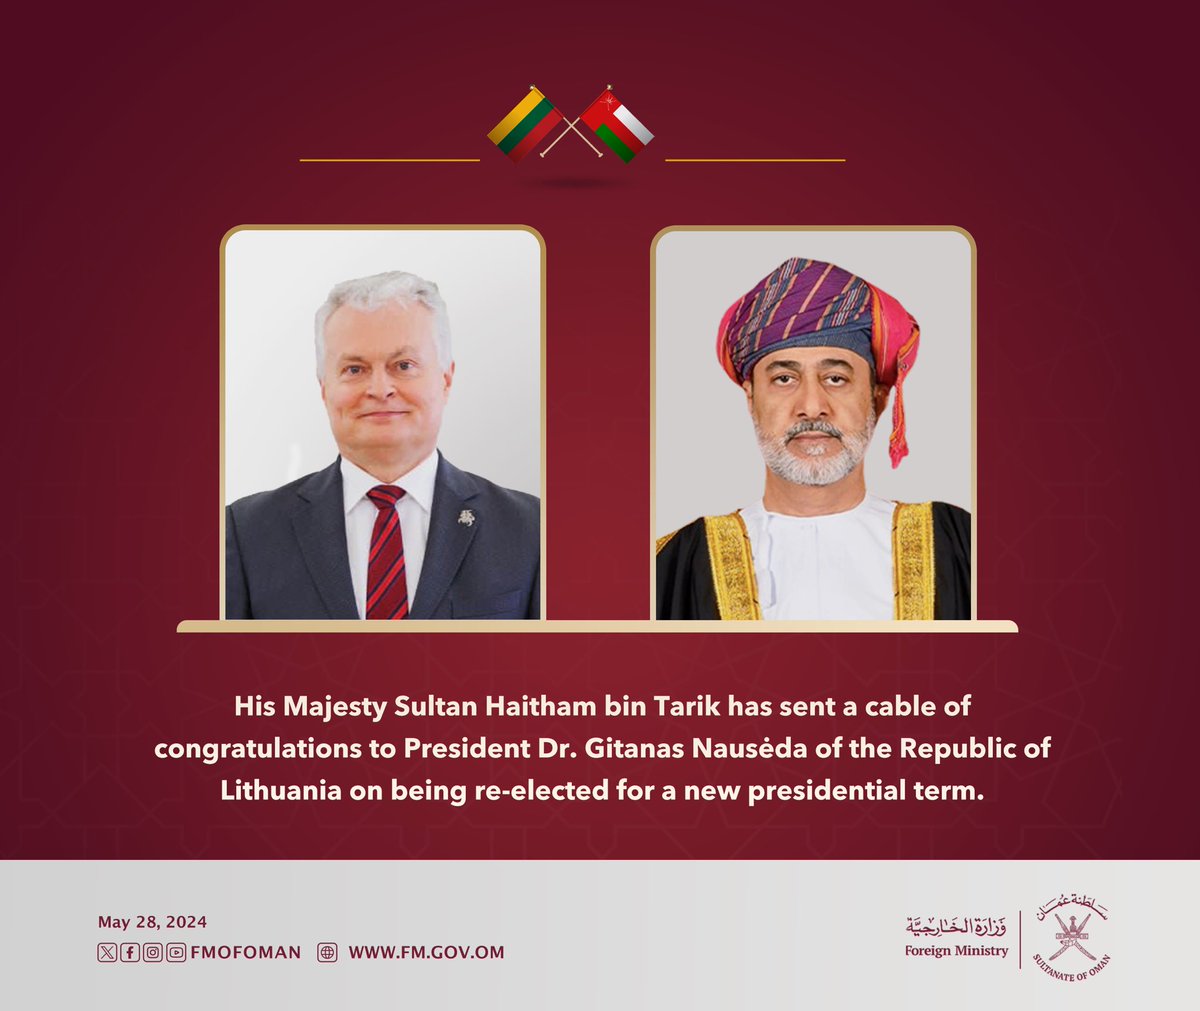 His Majesty the Sultan sends a cable of congratulations to President Dr. Gitanas Nausėda of the Republic of #Lithuania on being re-elected for a new presidential term.